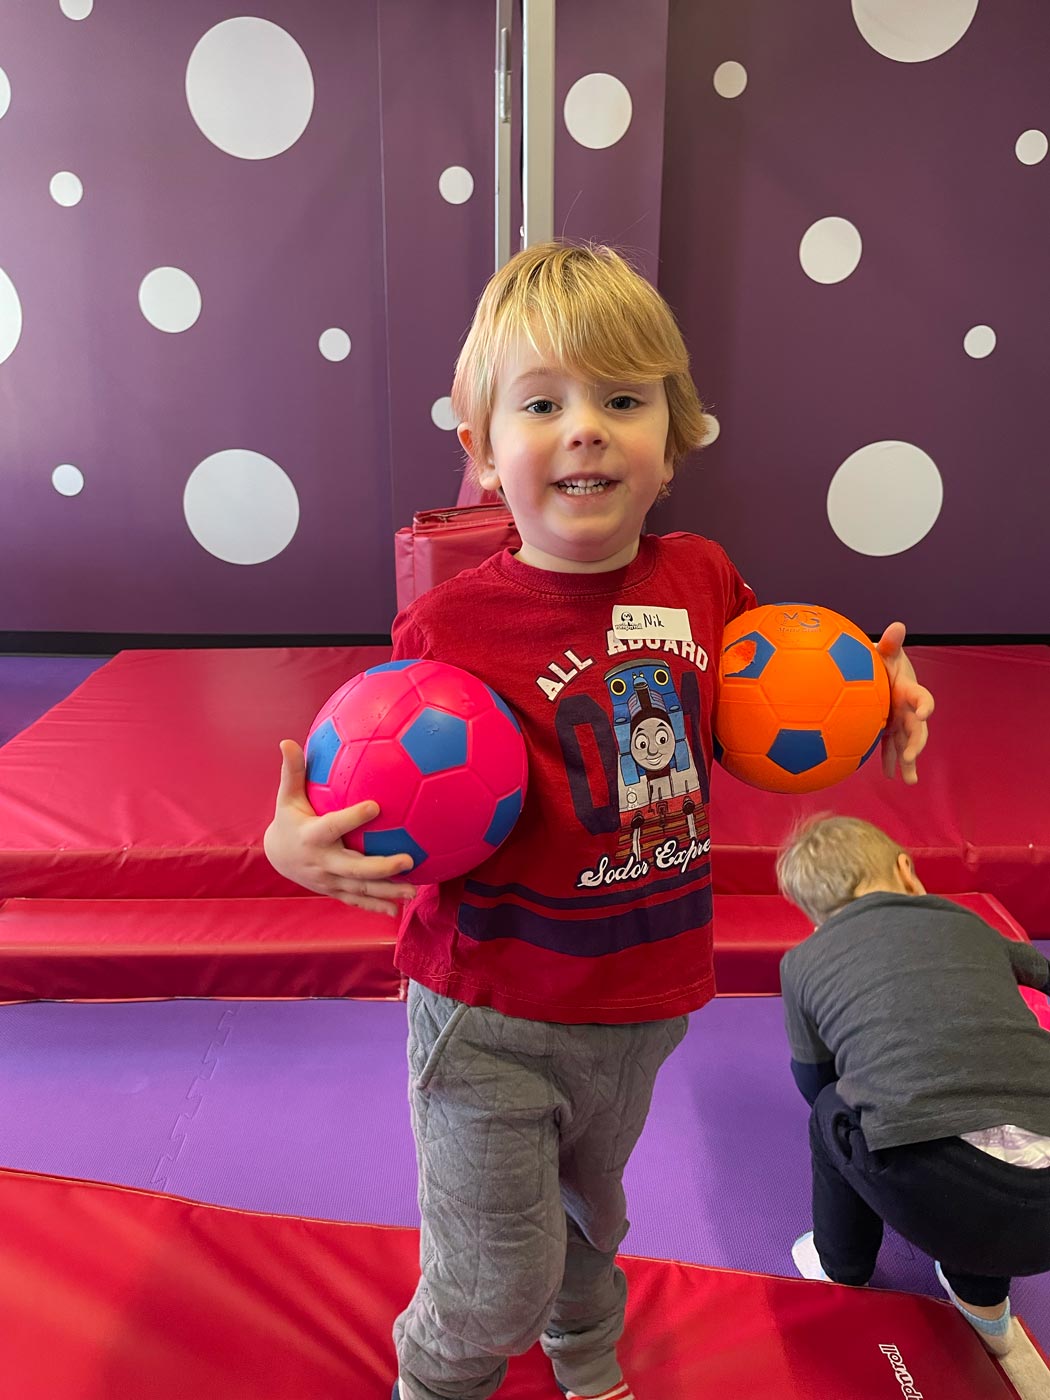 A little boy playing with soccer balls in Romp n' Roll's gym.